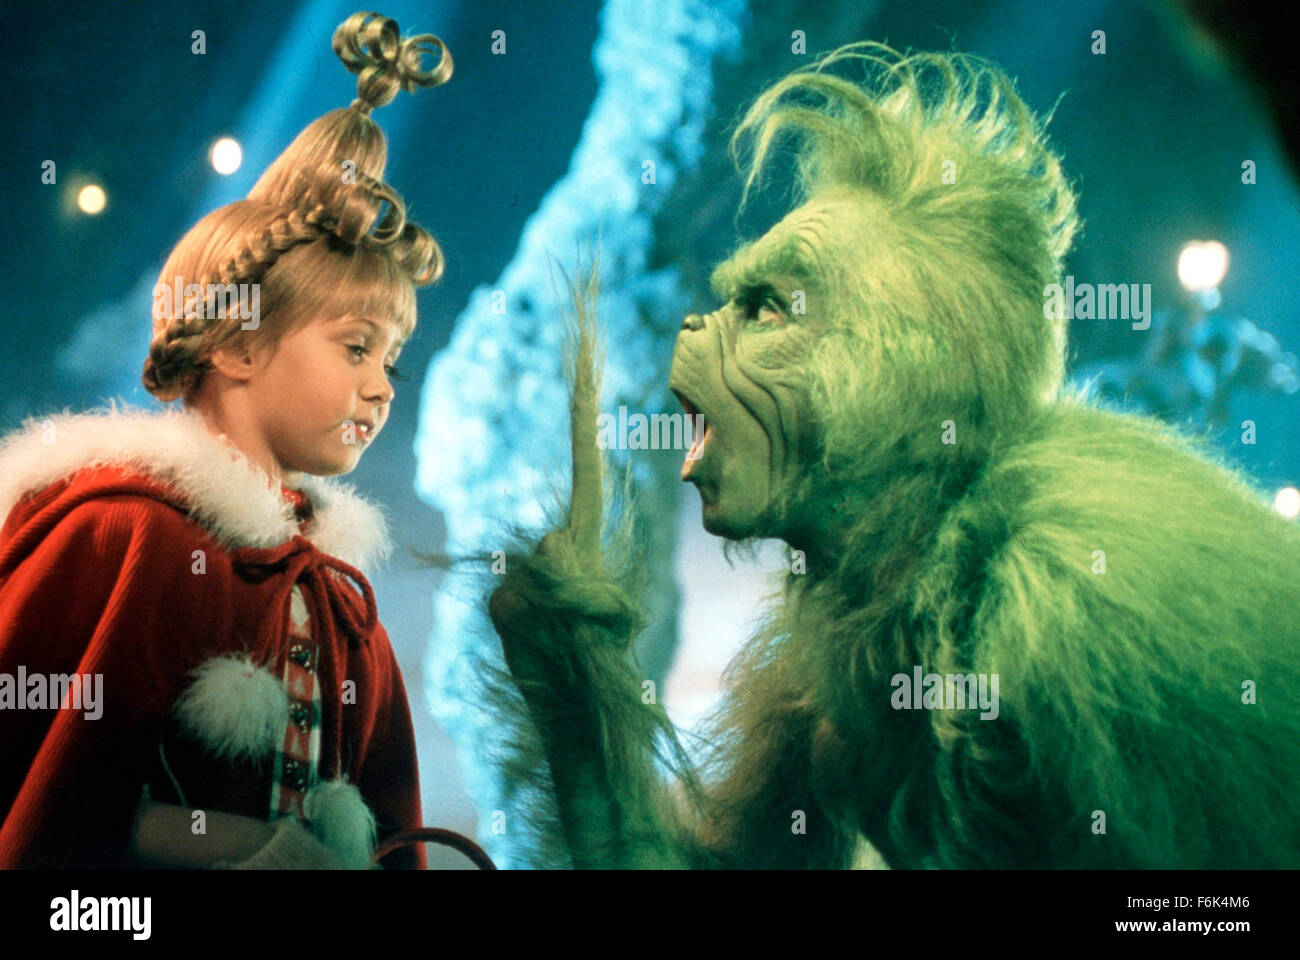 RELEASE DATE: November 17, 2000. MOVIE TITLE: How the Grinch Stole Christmas. STUDIO: Imagine Entertainment. PLOT: Based on the book by the famous Dr. Seuss. Inside a snowflake exists the magical land of Whoville. In Whoville, live the Who's, an almost mutated sort of munchkinlike people. All the Who's love Christmas, yet just outside of their beloved Whoville lives the Grinch. PICTURED: . Stock Photo